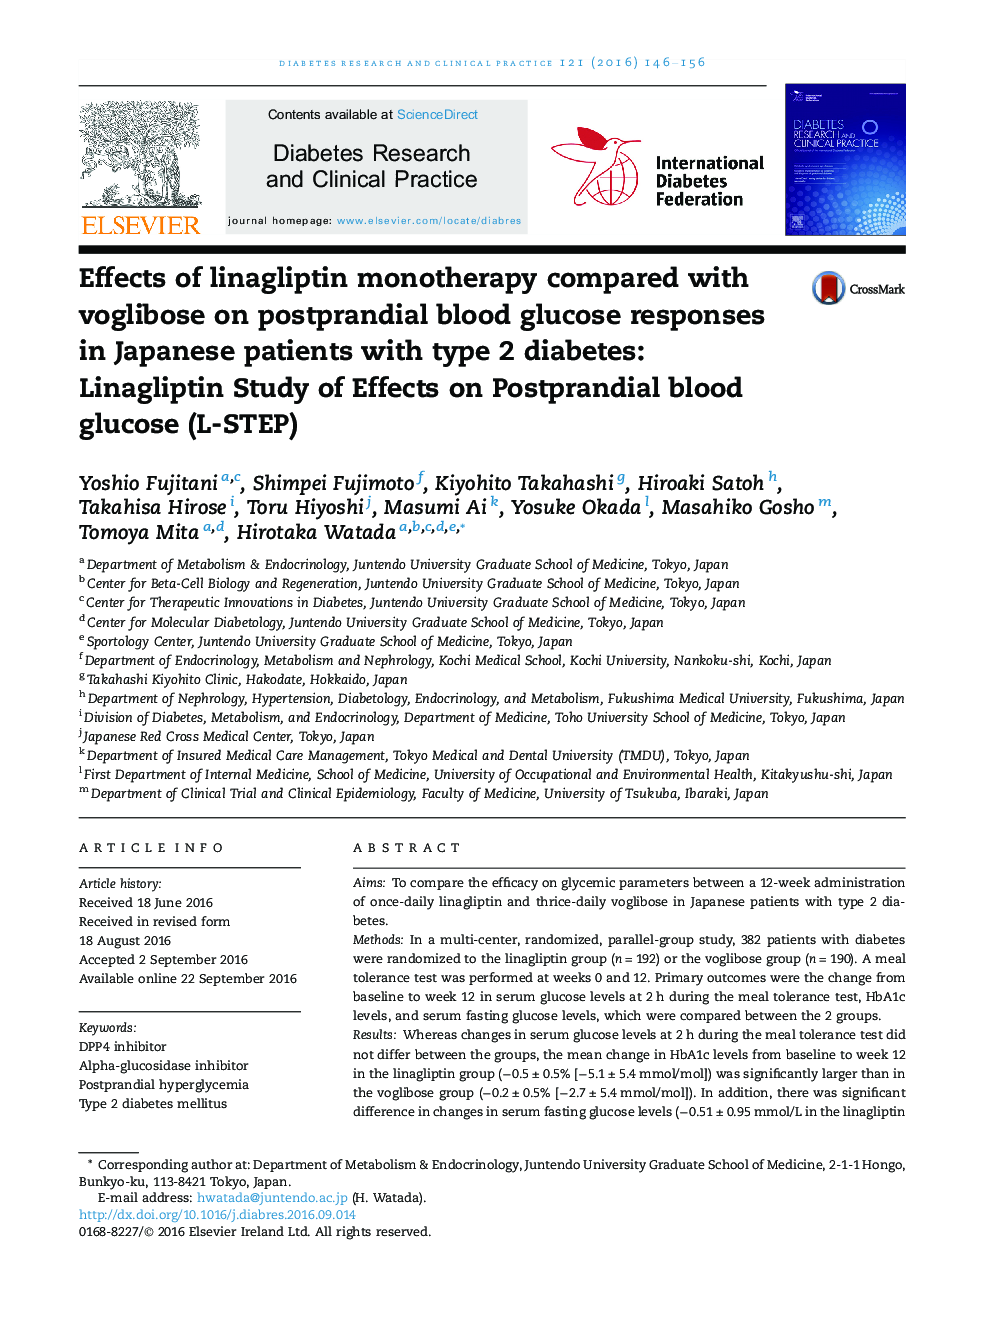 Effects of linagliptin monotherapy compared with voglibose on postprandial blood glucose responses in Japanese patients with type 2 diabetes: Linagliptin Study of Effects on Postprandial blood glucose (L-STEP)